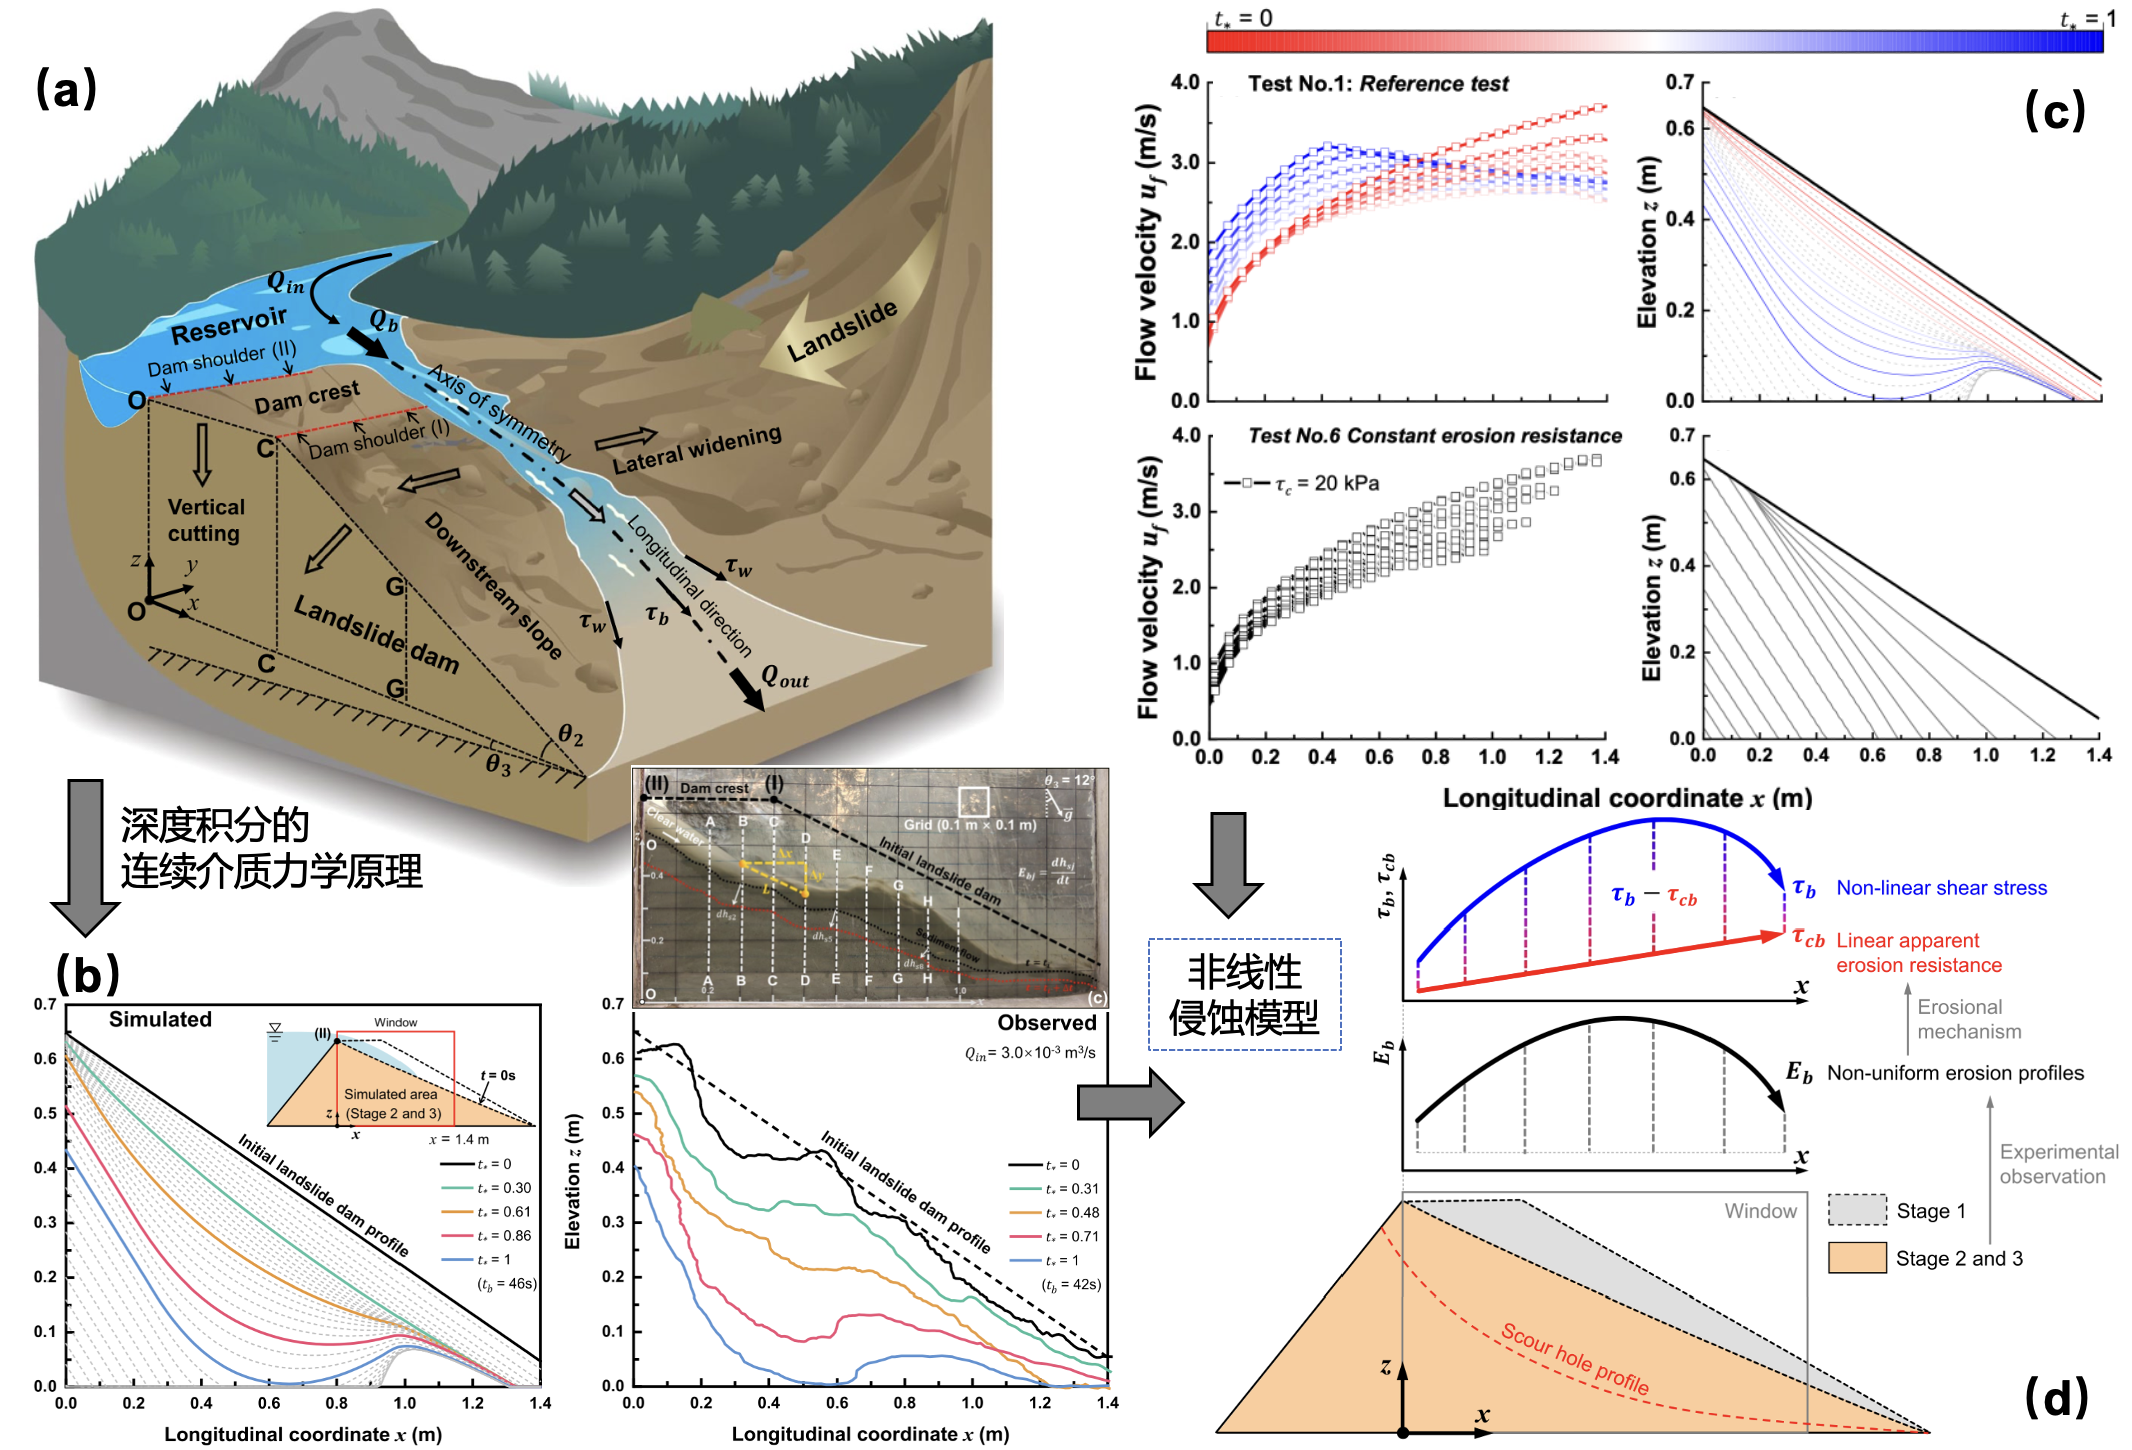 Important research progress has been made by the Institute of Mountain Hazards and Environment (IMHE) on the mechanisms of landslide dam overtopping failure